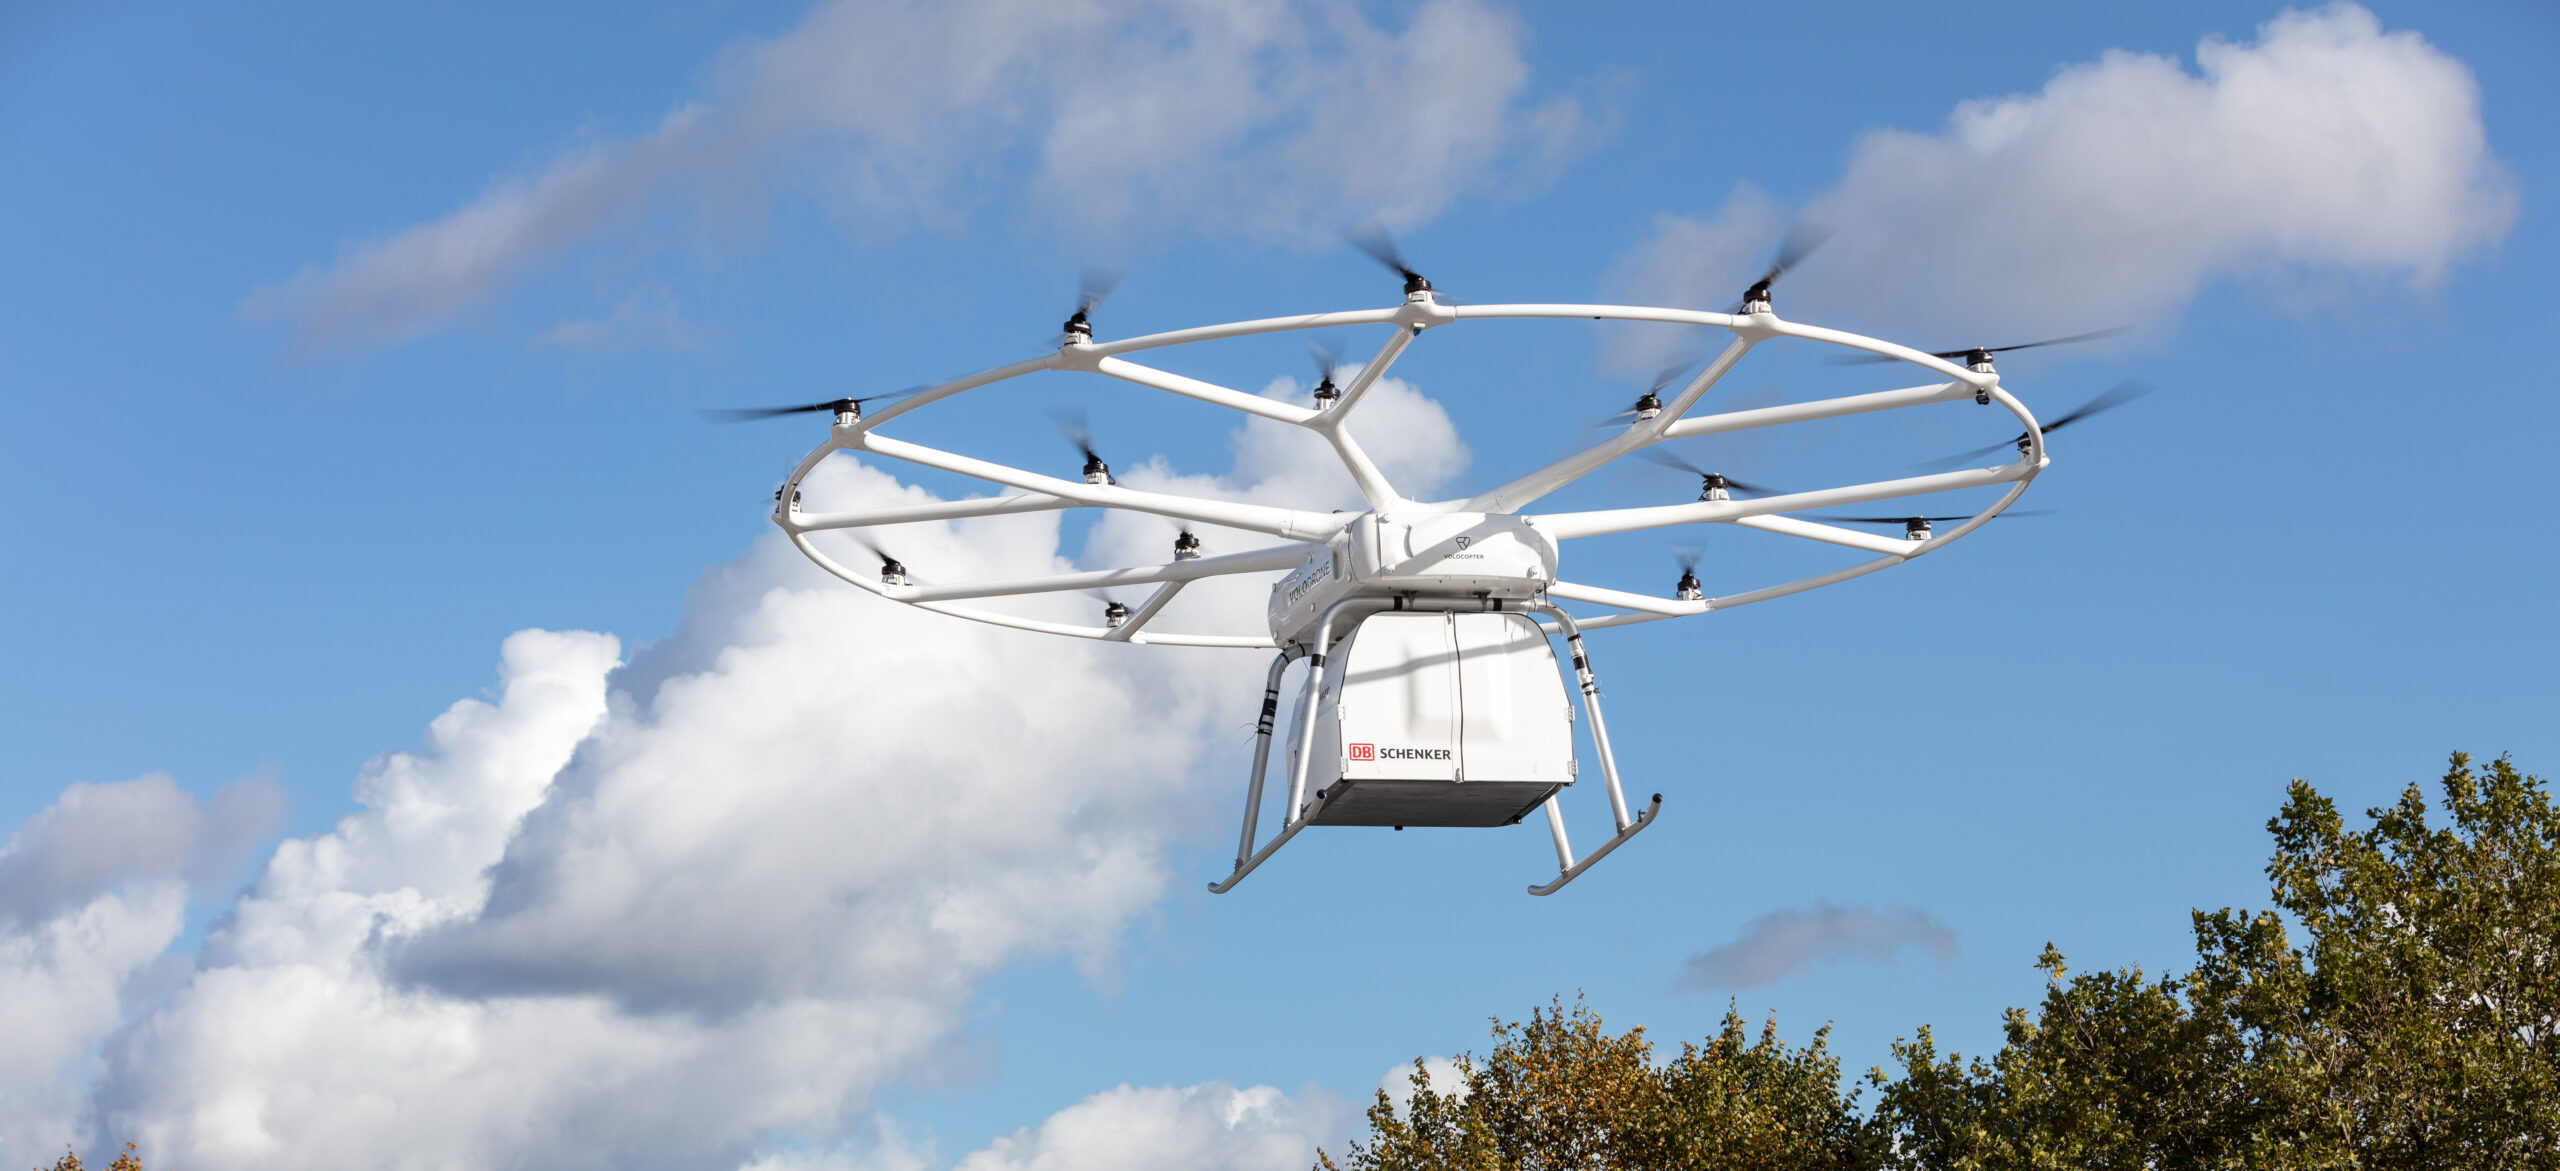 Drone: Volocopter cargo, An aircraft guided by remote control, Multicopter. 2560x1180 Dual Screen Background.